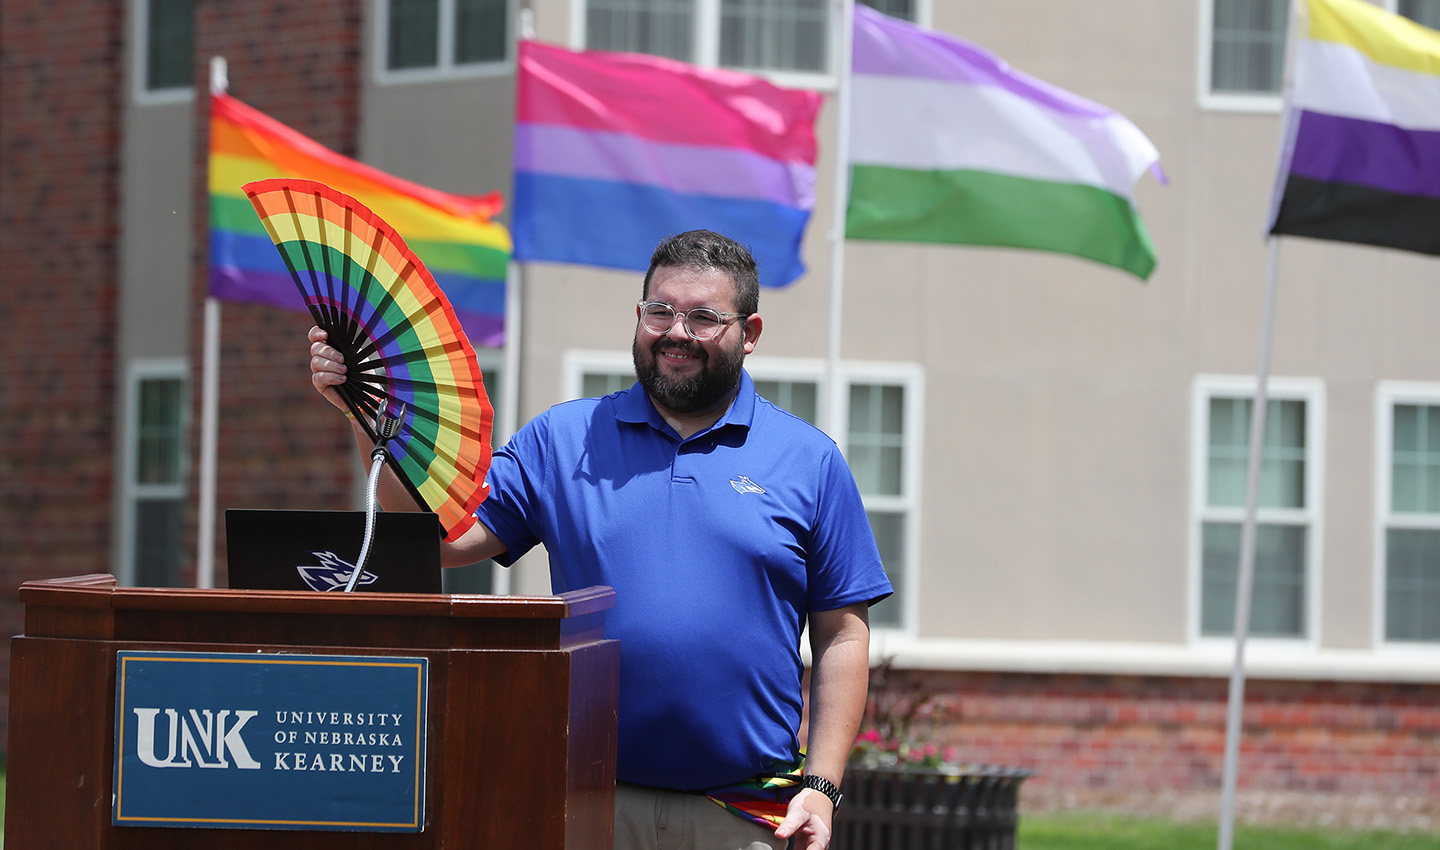 Luis Olivas, interim director of UNK’s Office of Student Diversity and Inclusion, is pictured during this year’s Pride Month celebration on campus. (Photos by Erika Pritchard, UNK Communications)